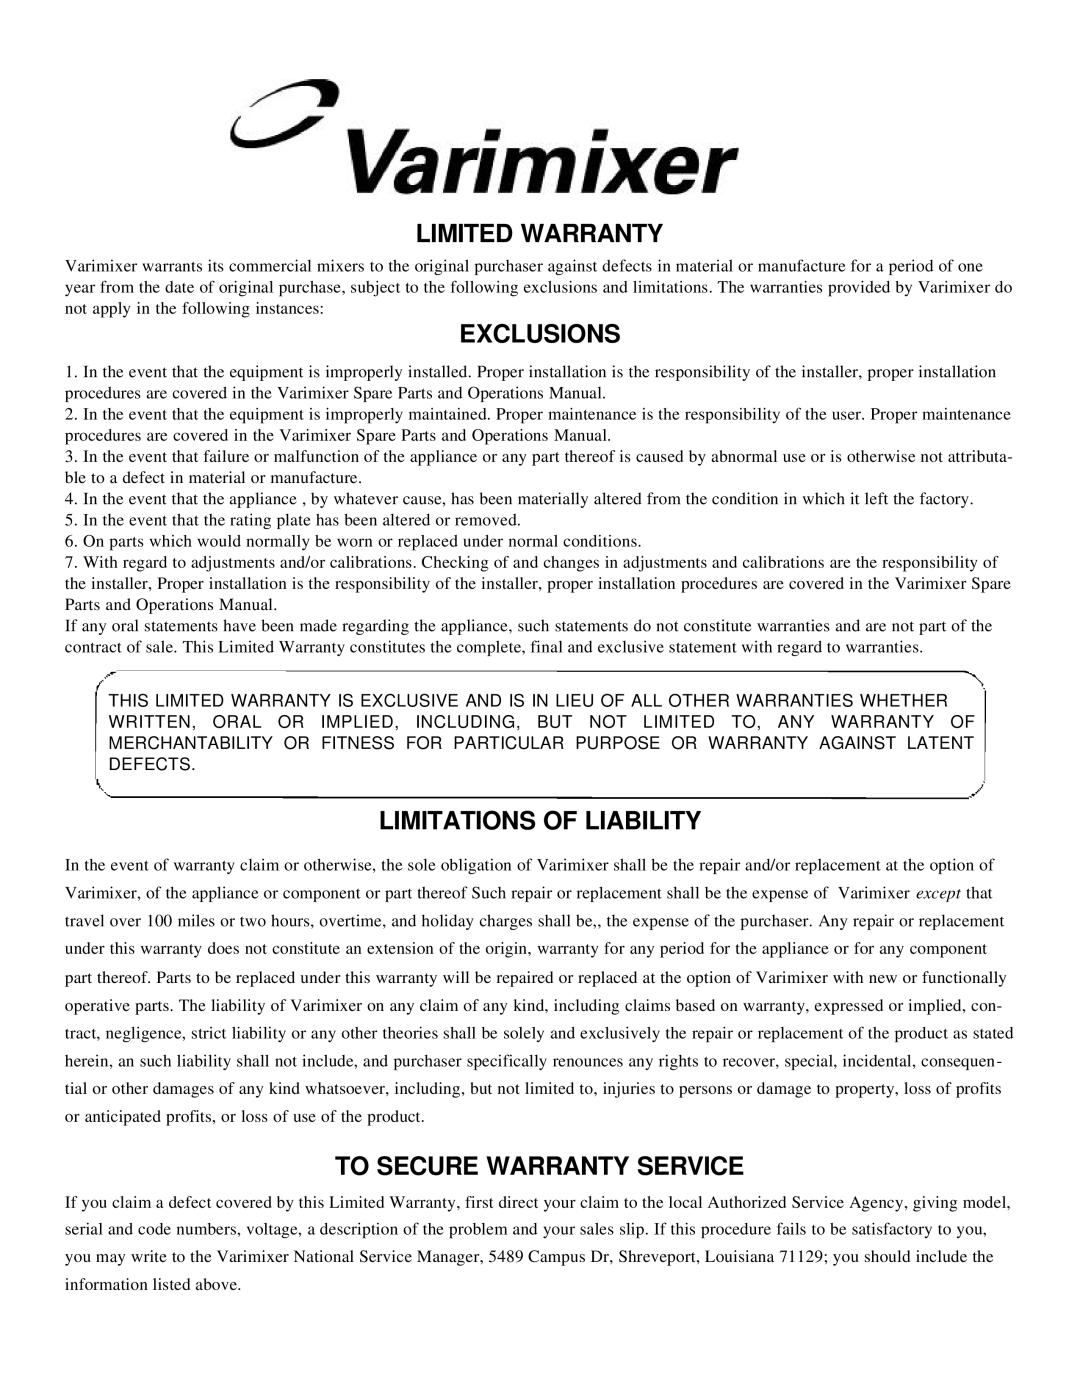 Varimixer W40(A), W60P, W40P, W30(A) Limited Warranty, Exclusions, Limitations Of Liability, To Secure Warranty Service 